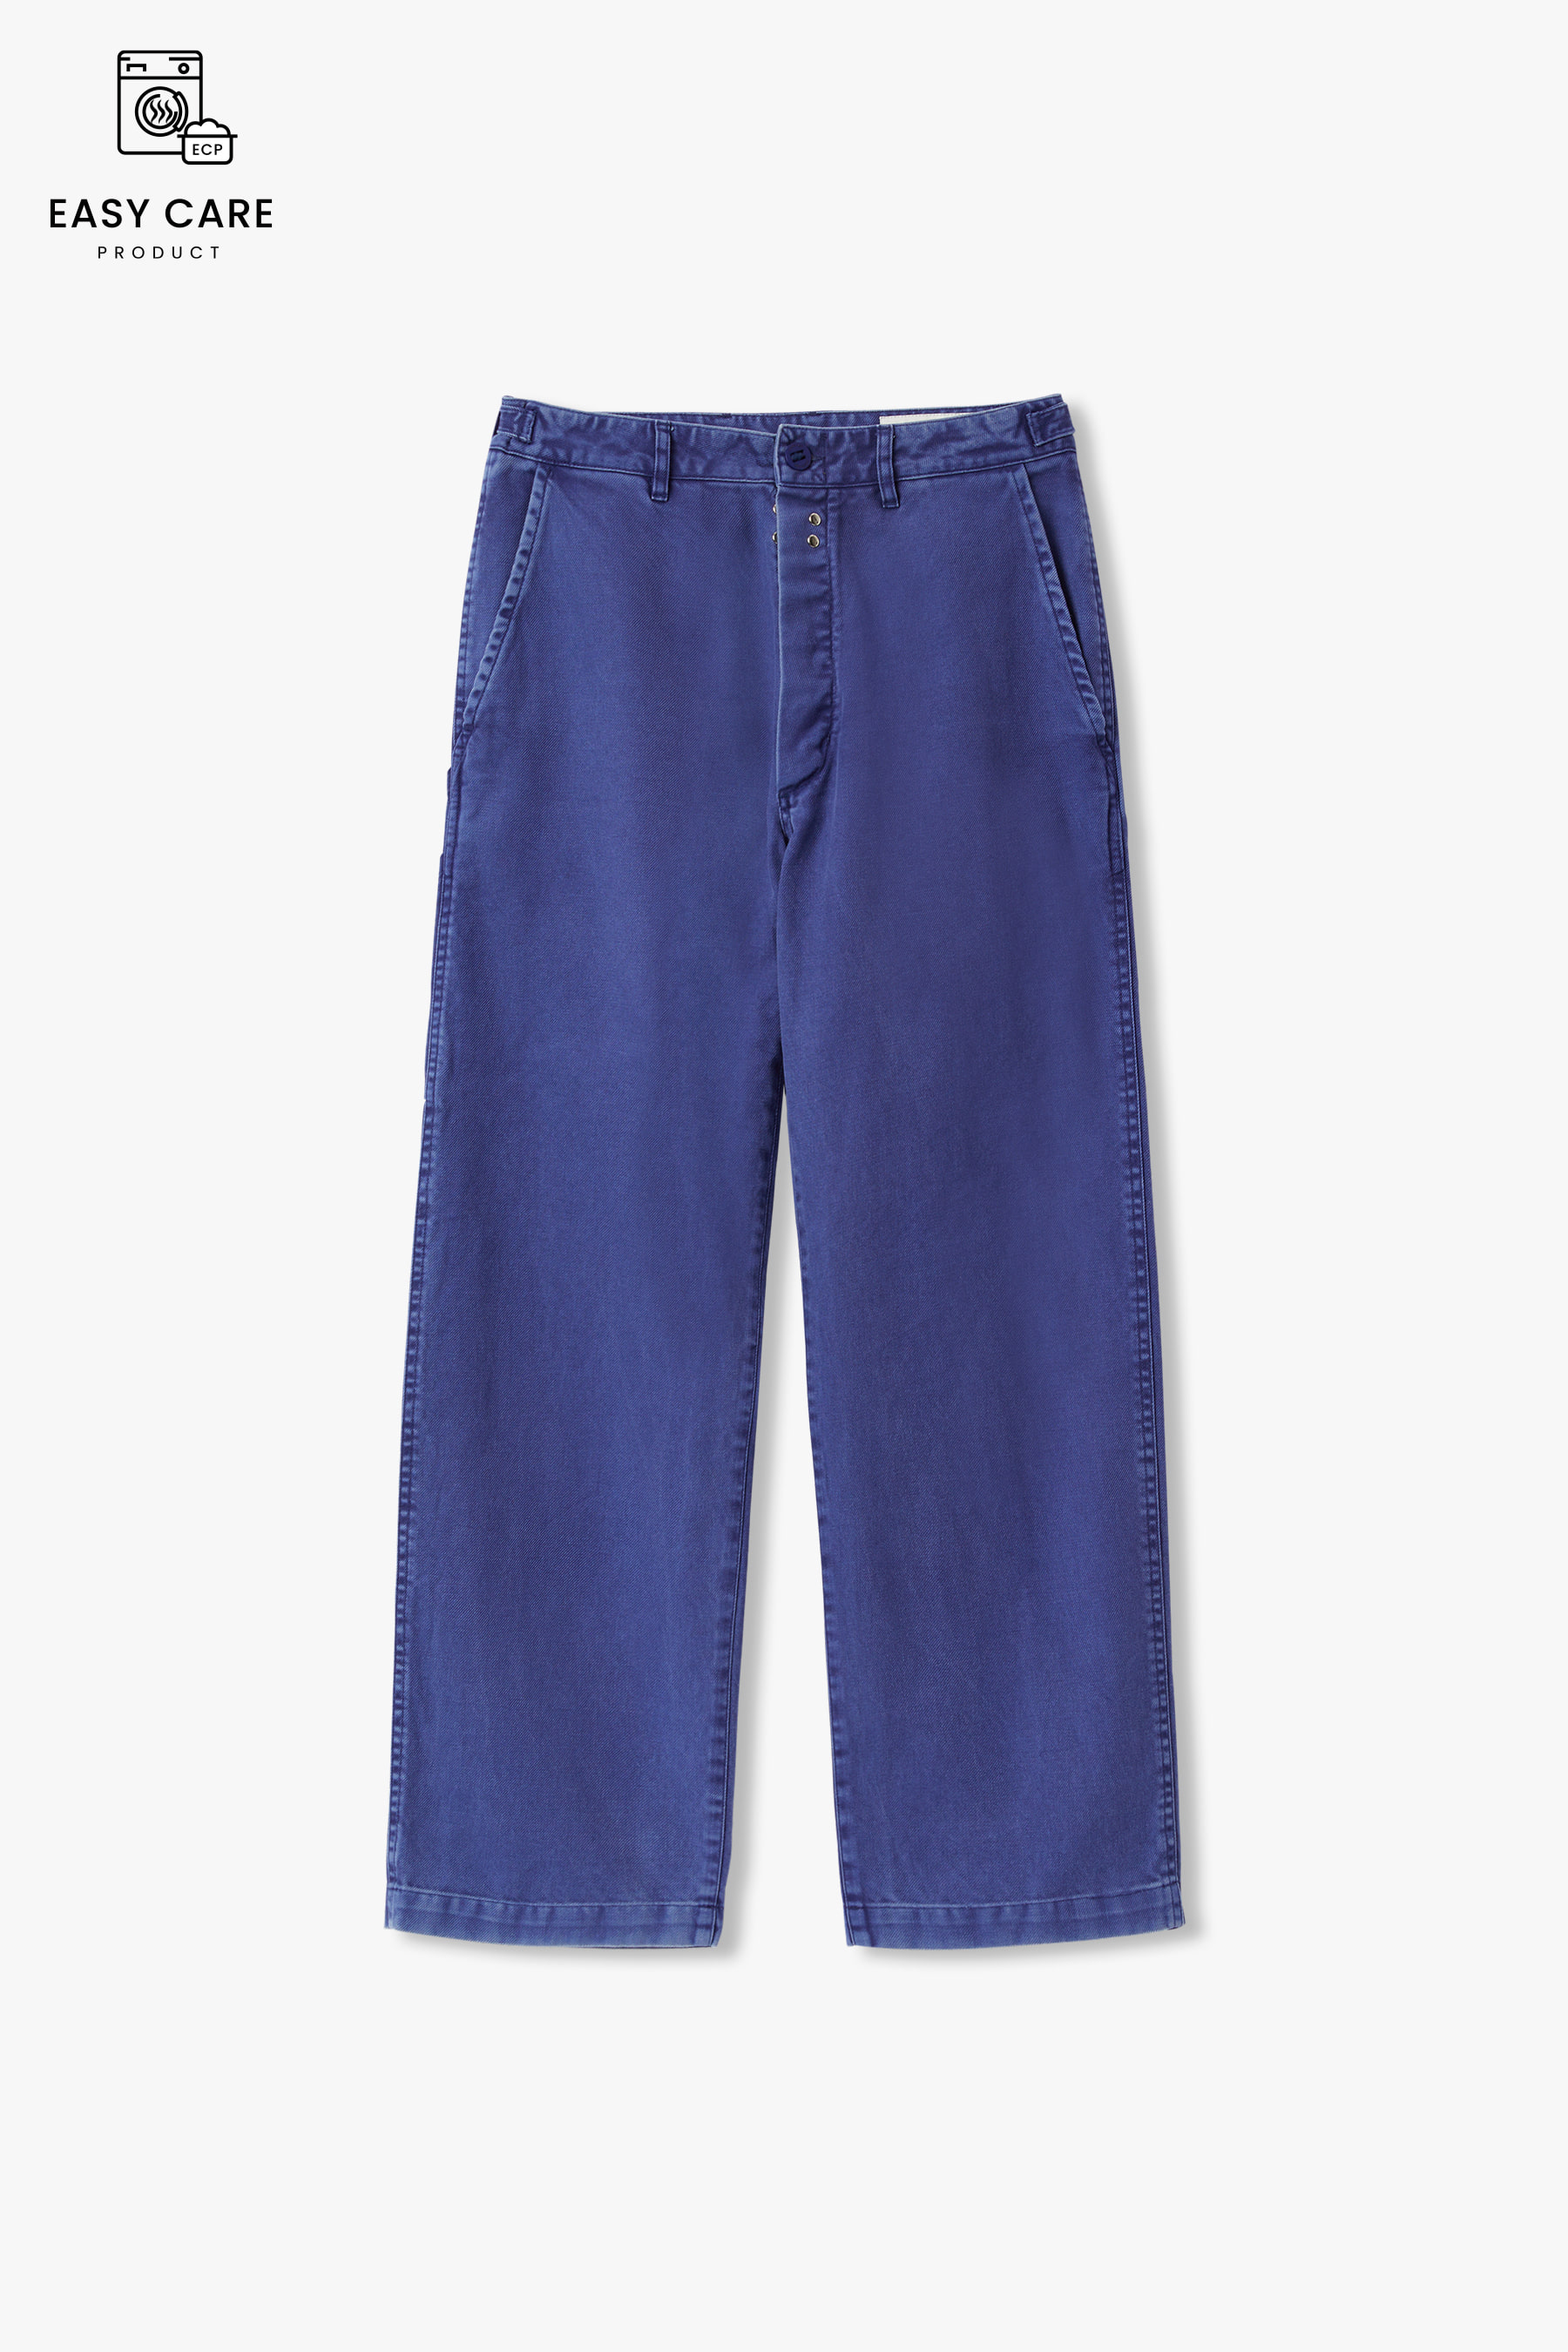 FRENCH BLUE YRS Y-964 ORIGINAL SERGE COTTON WASHED  FRENCH WORK PANTS (ECP GARMENT PROCESS)